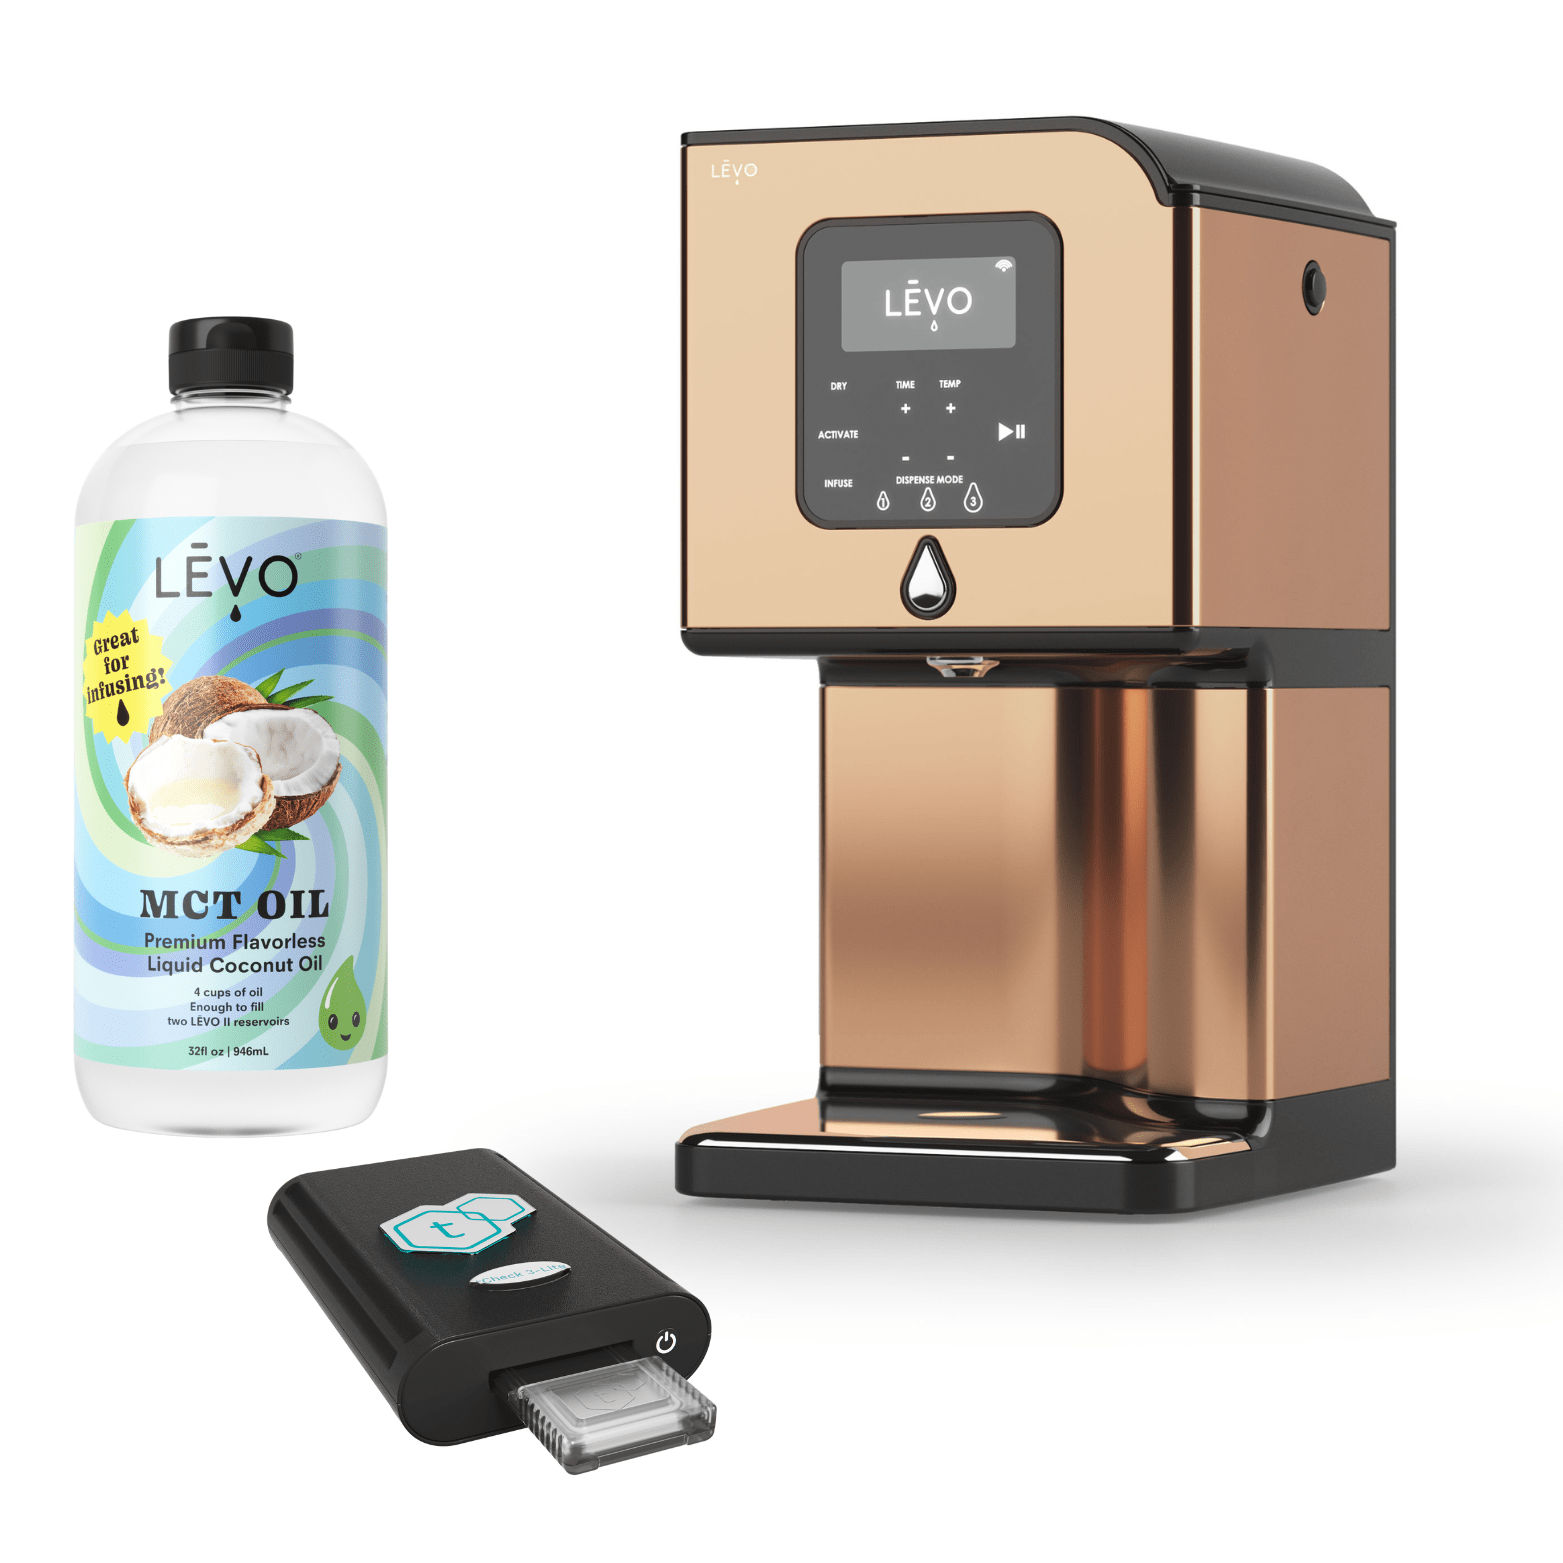 LEVO Lux oil infuser with tCheck 3 potency testing device and LEVO MCT Oil. LĒVO Lux x tCheck Potency Tester Bundle: Infuse and test with precision.